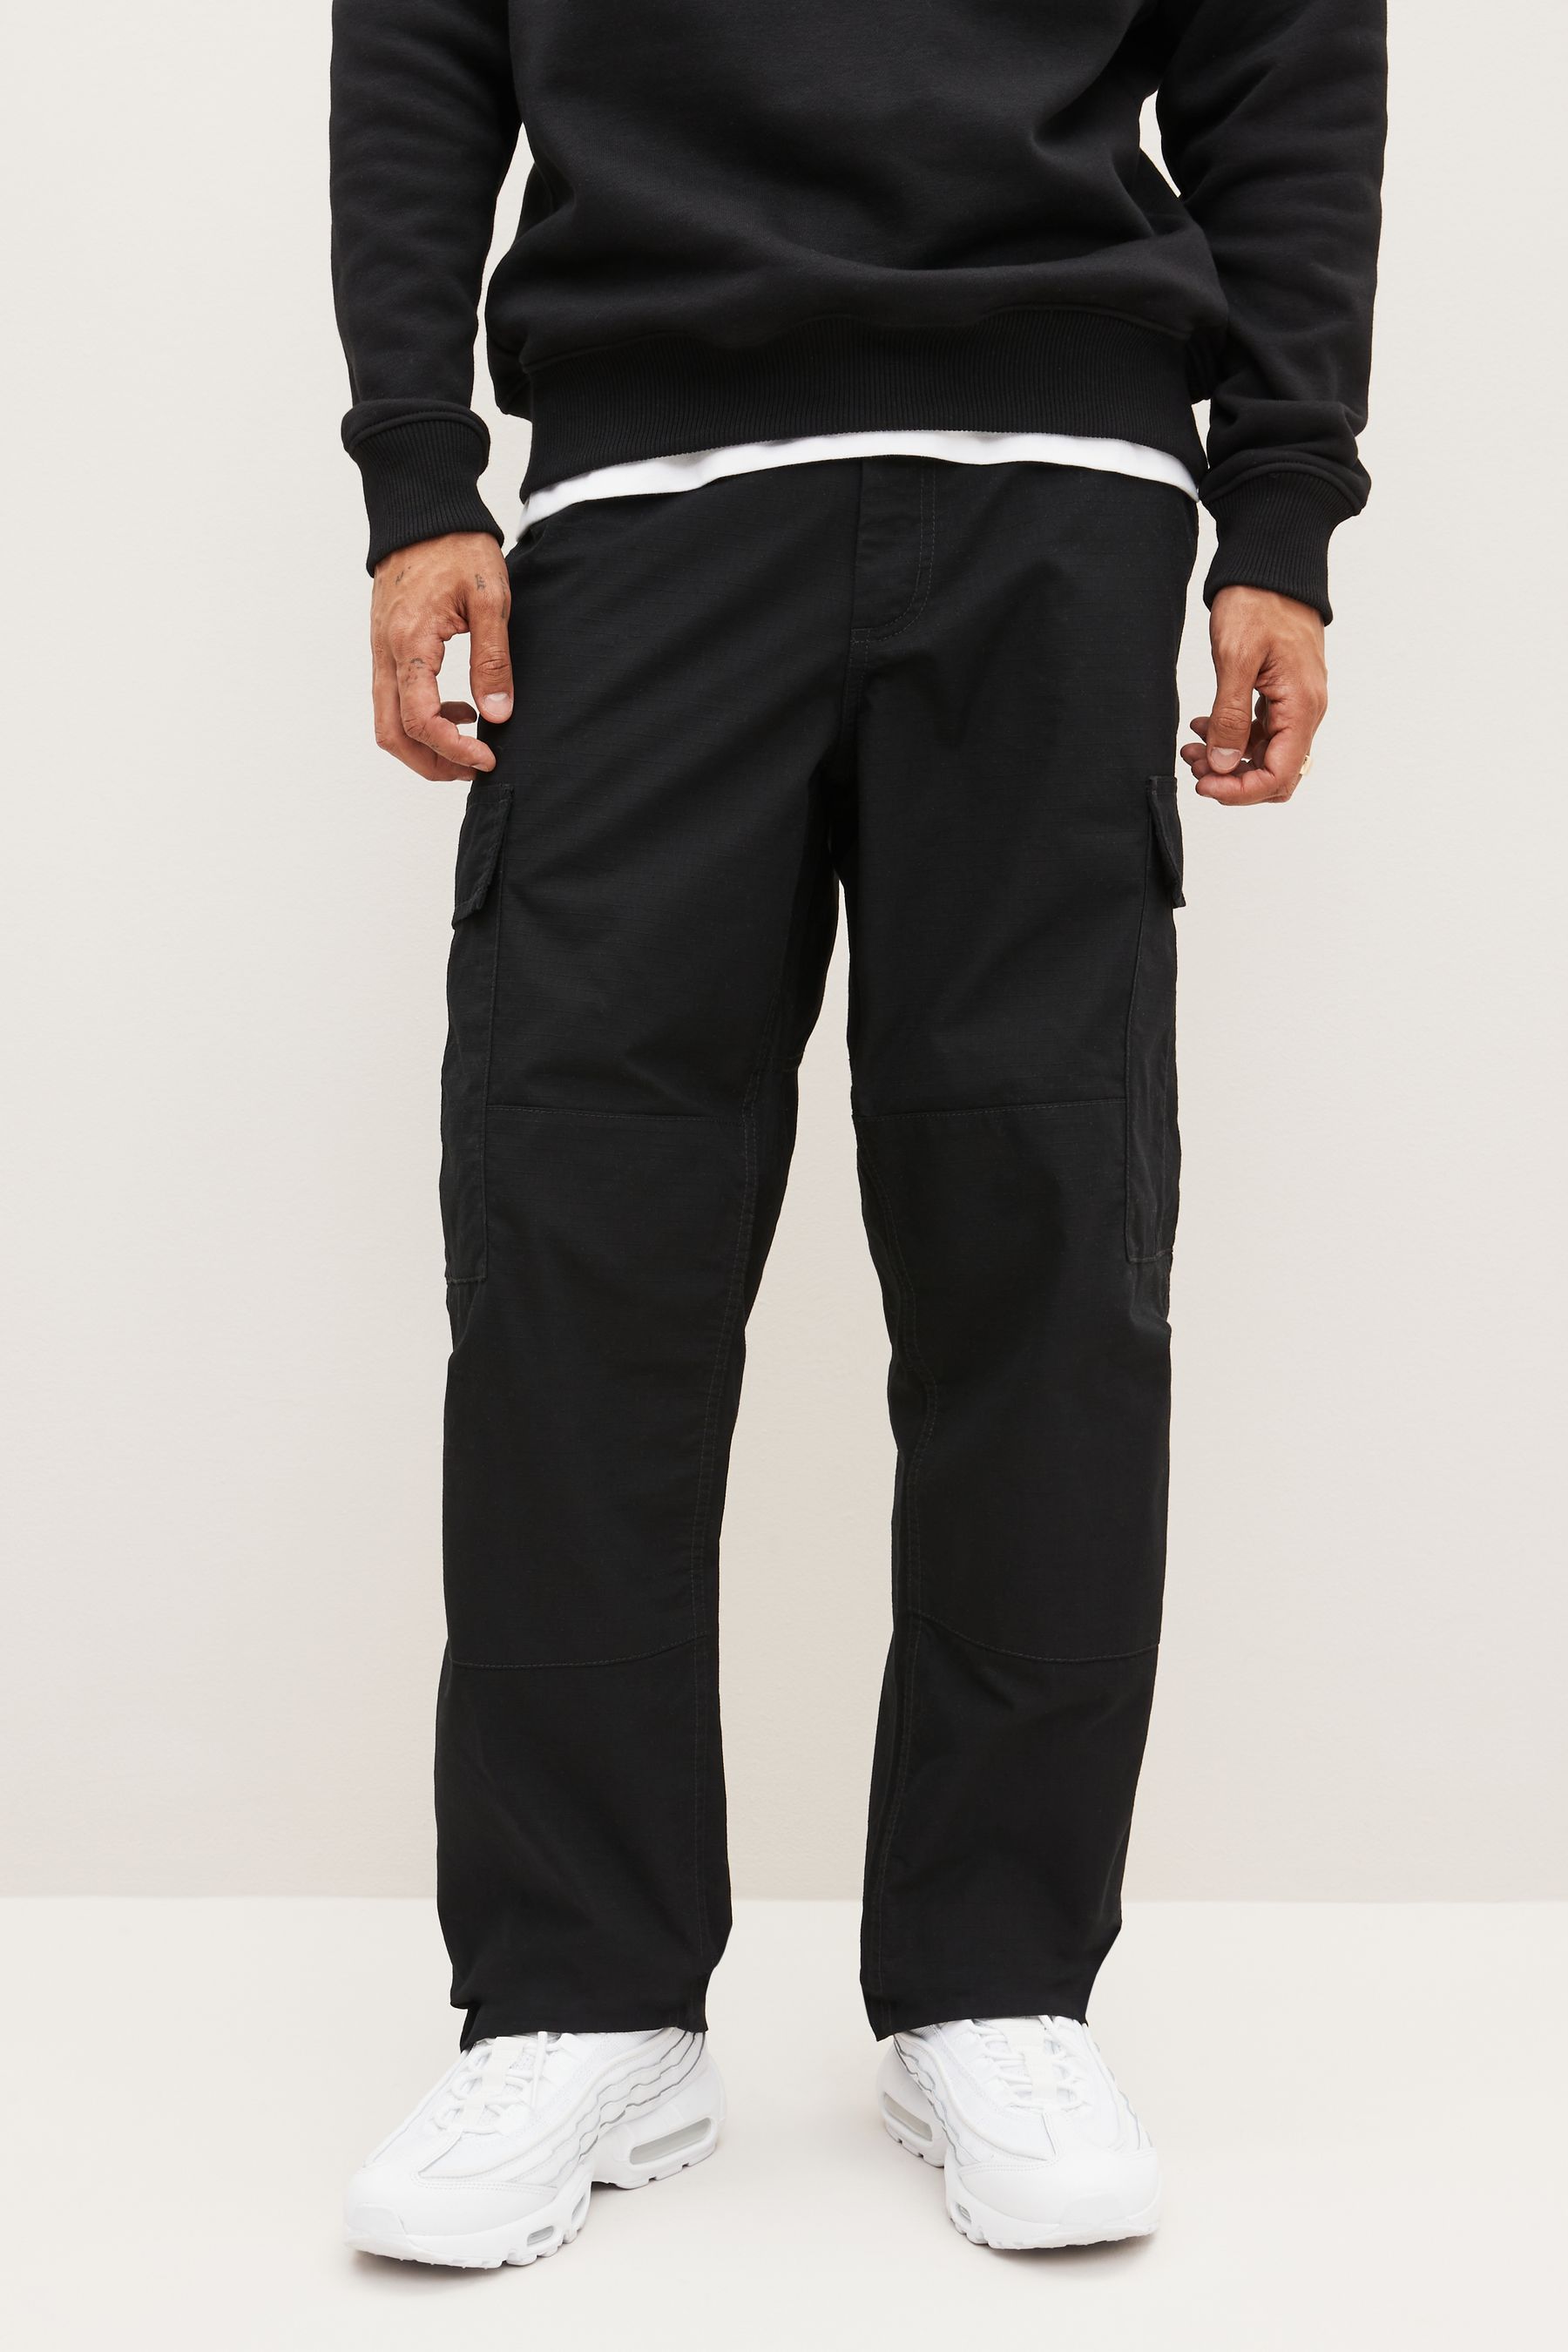 Buy Black Relaxed Fit Ripstop Cargo Trousers from the Next UK online shop